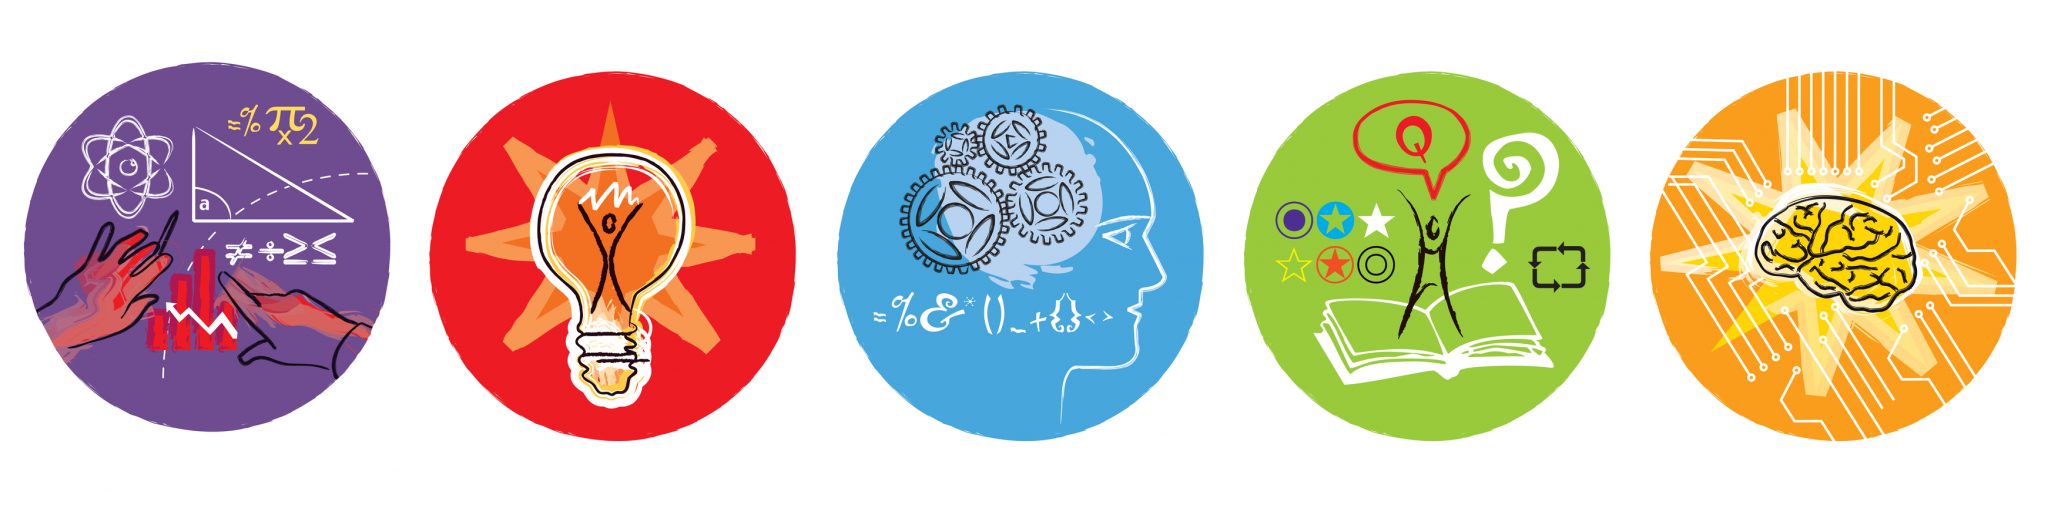 Handrawn icons depict learning, like a lightbulb or a brain inside a star